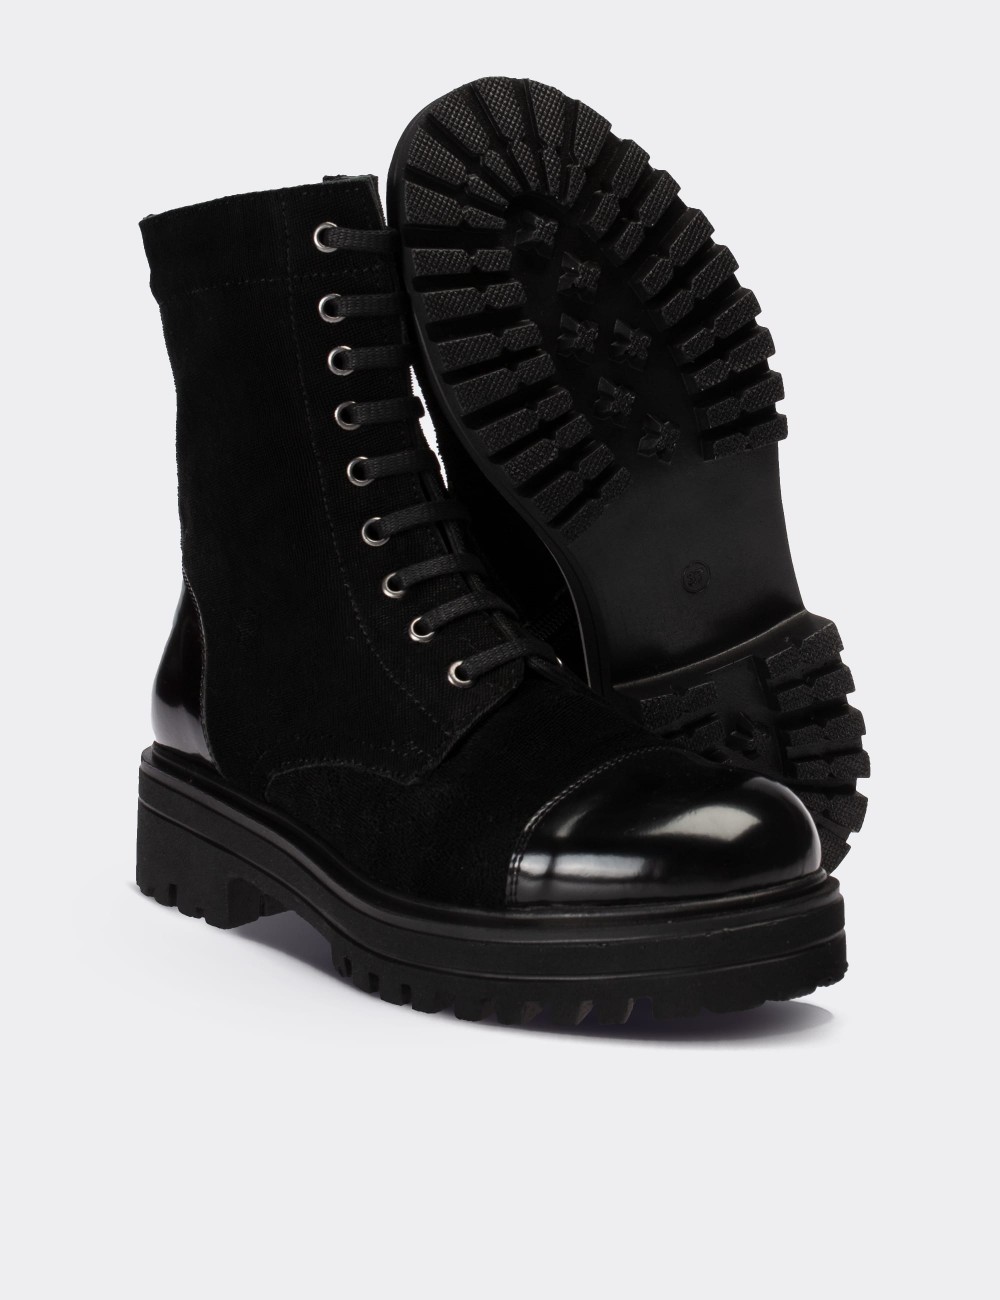 Black Suede Leather Postal Boots - 01802ZSYHE03